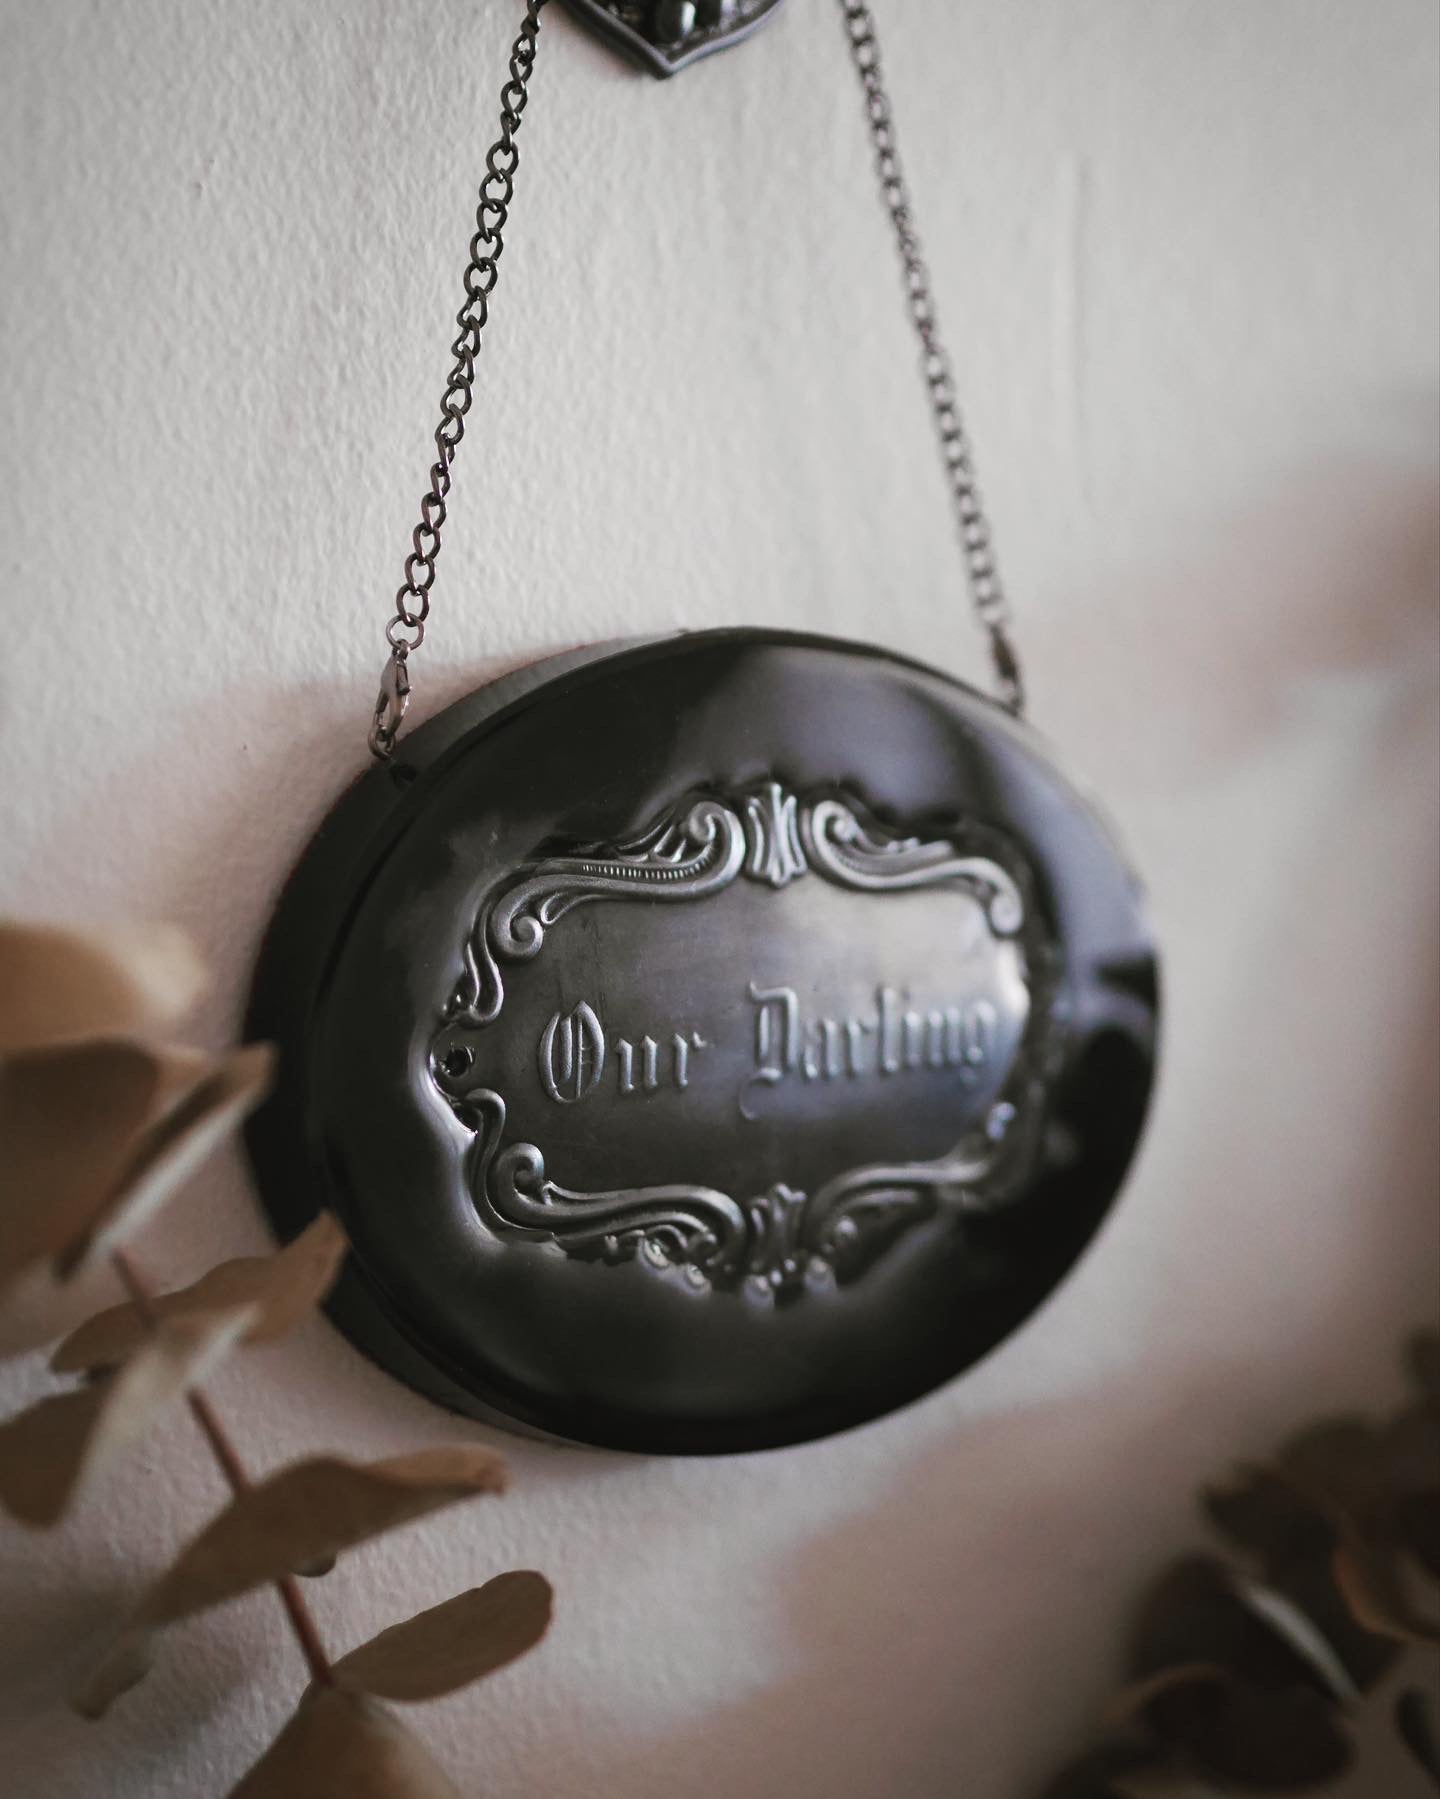 Our Darling Victorian Mourning Casket Plaque - Pewter